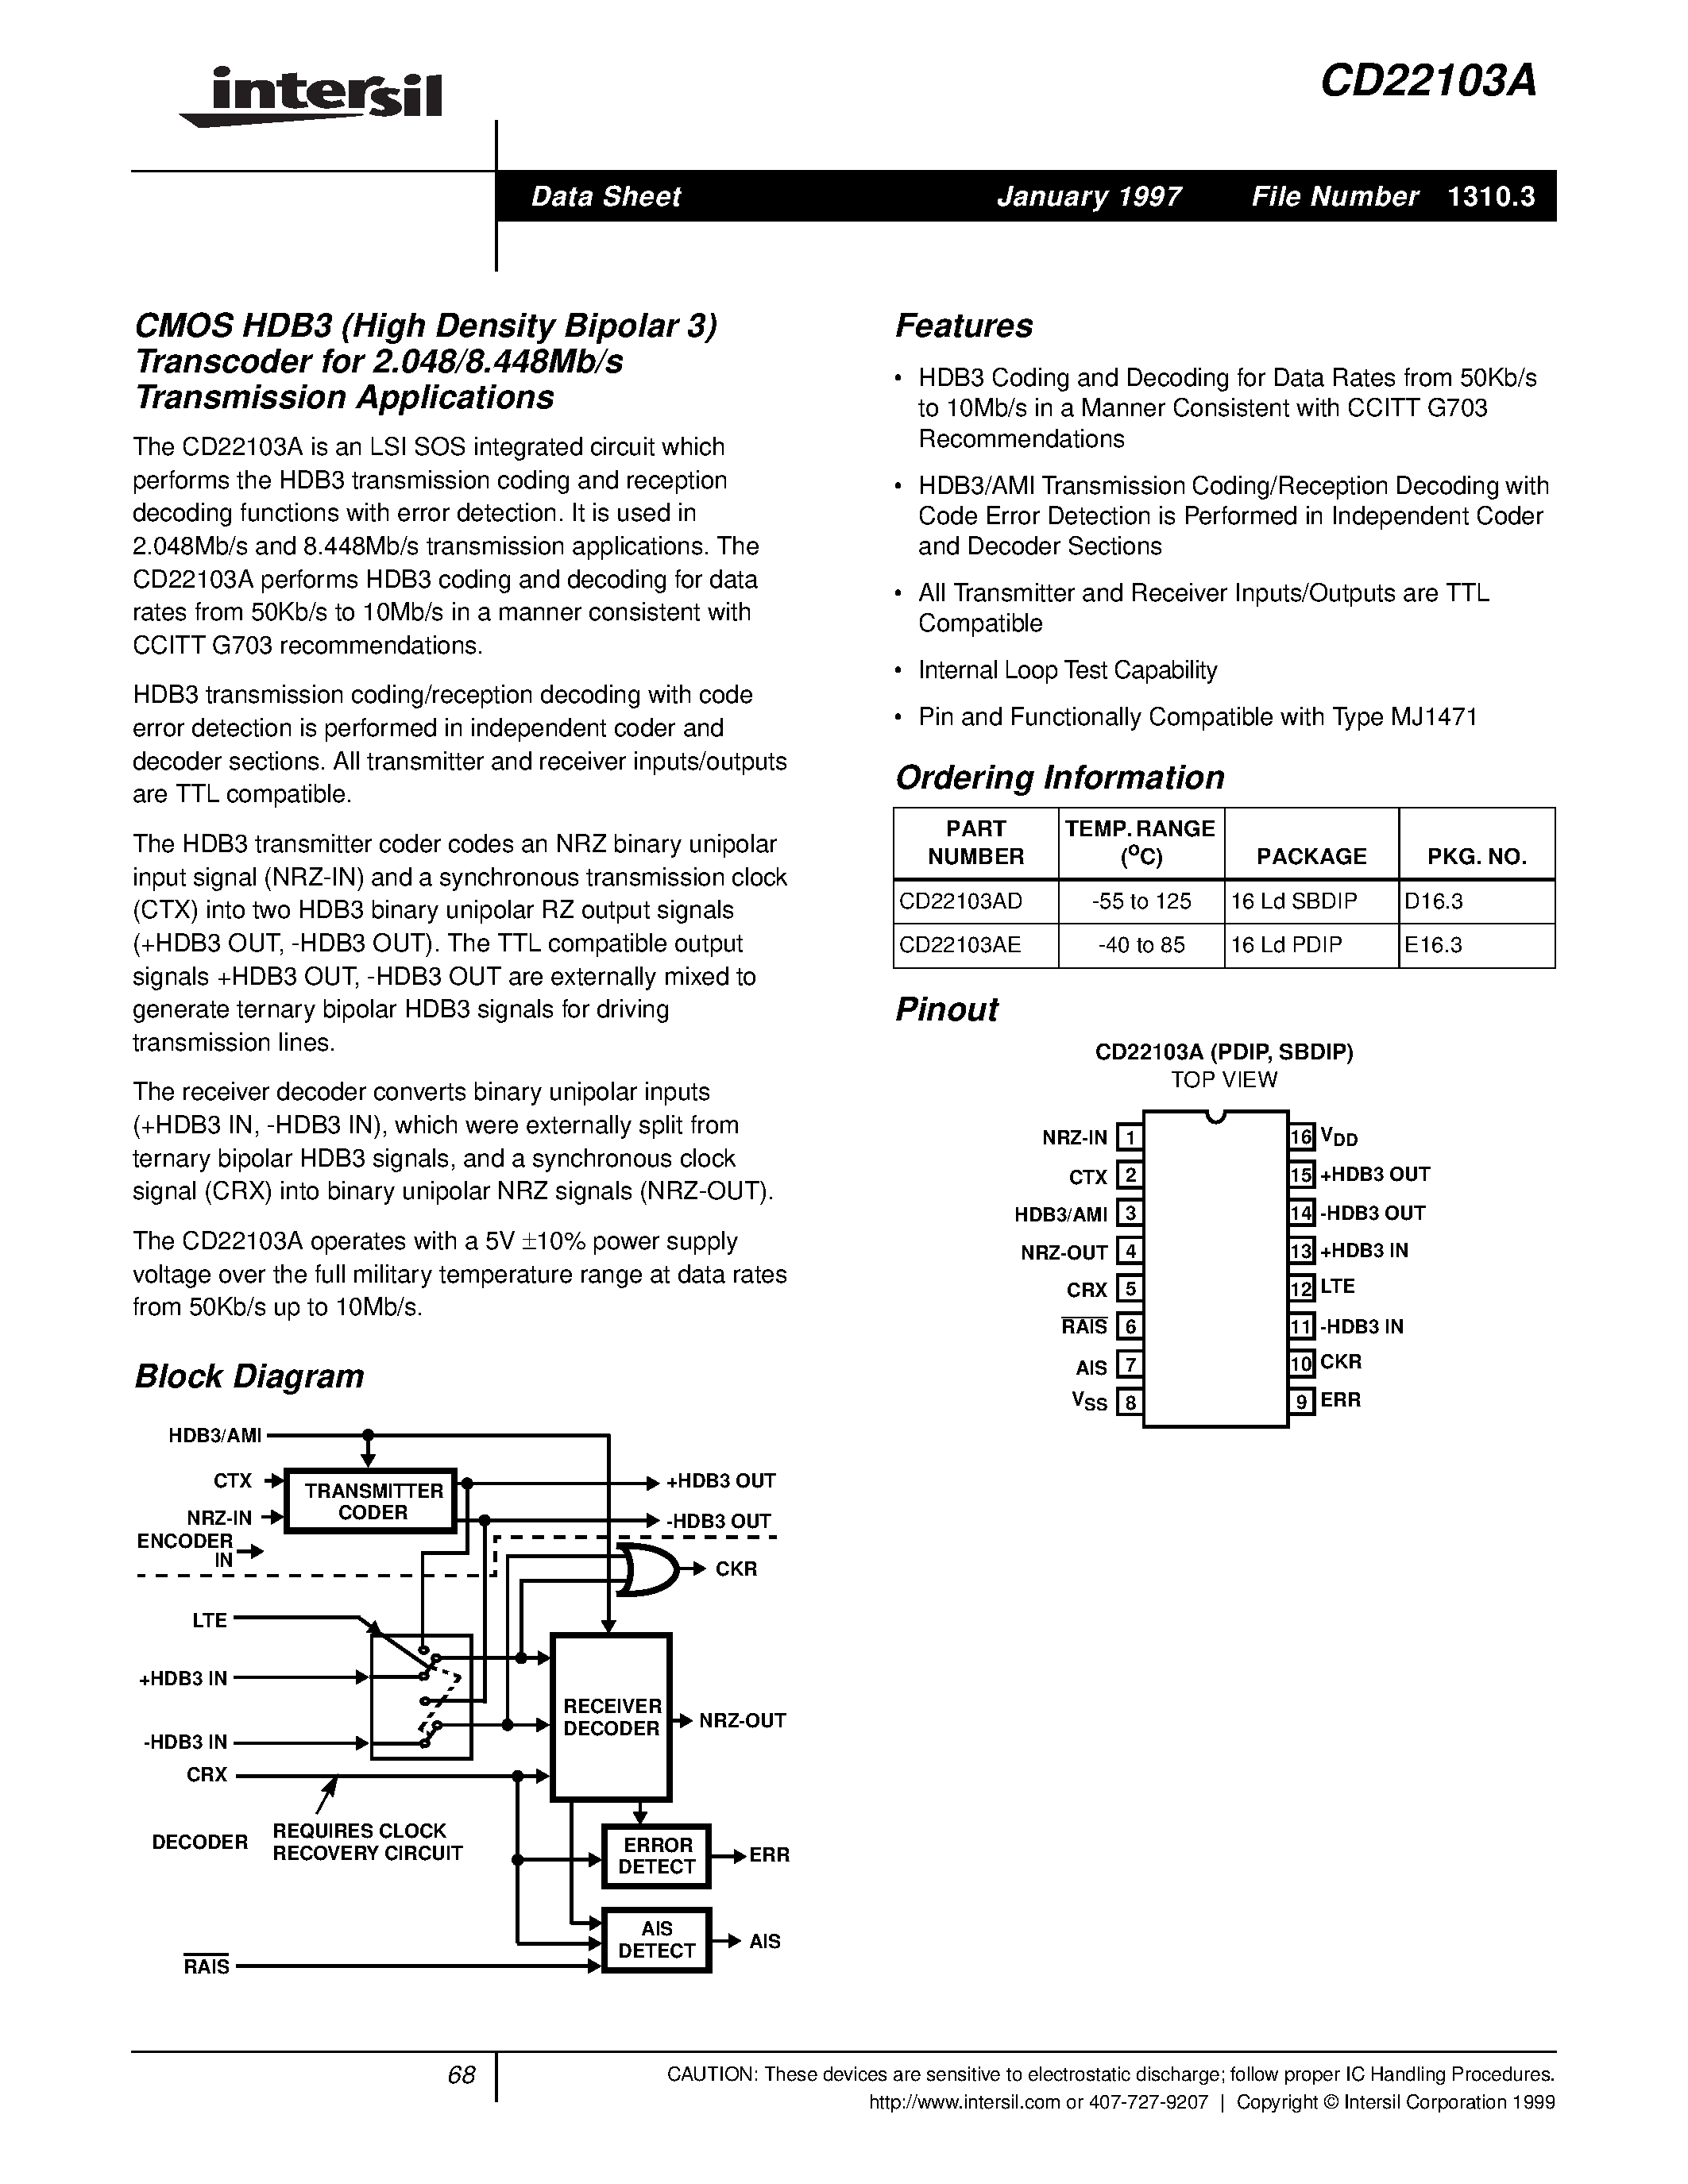 Datasheet CD22103A - CMOS HDB3 High Density Bipolar 3 Transcoder for 2.048/8.448Mb/s Transmission Applications page 1